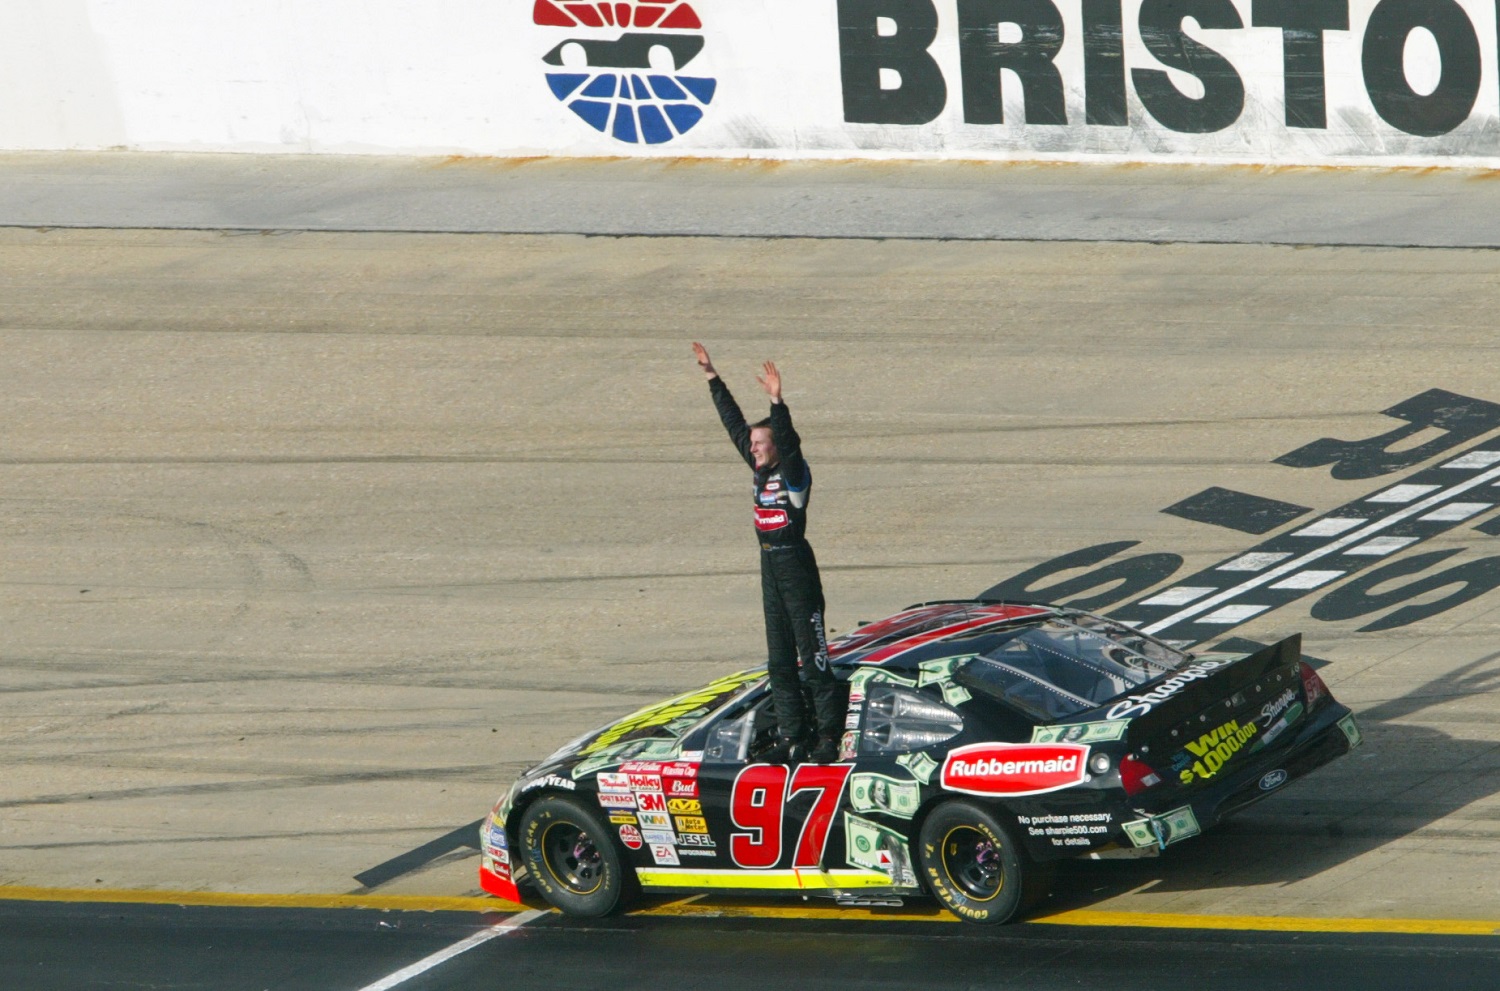 Kurt Busch celebrates his first Cup Series victory after the Food City 500 at Bristol Motor Speedway on March 24, 2002.